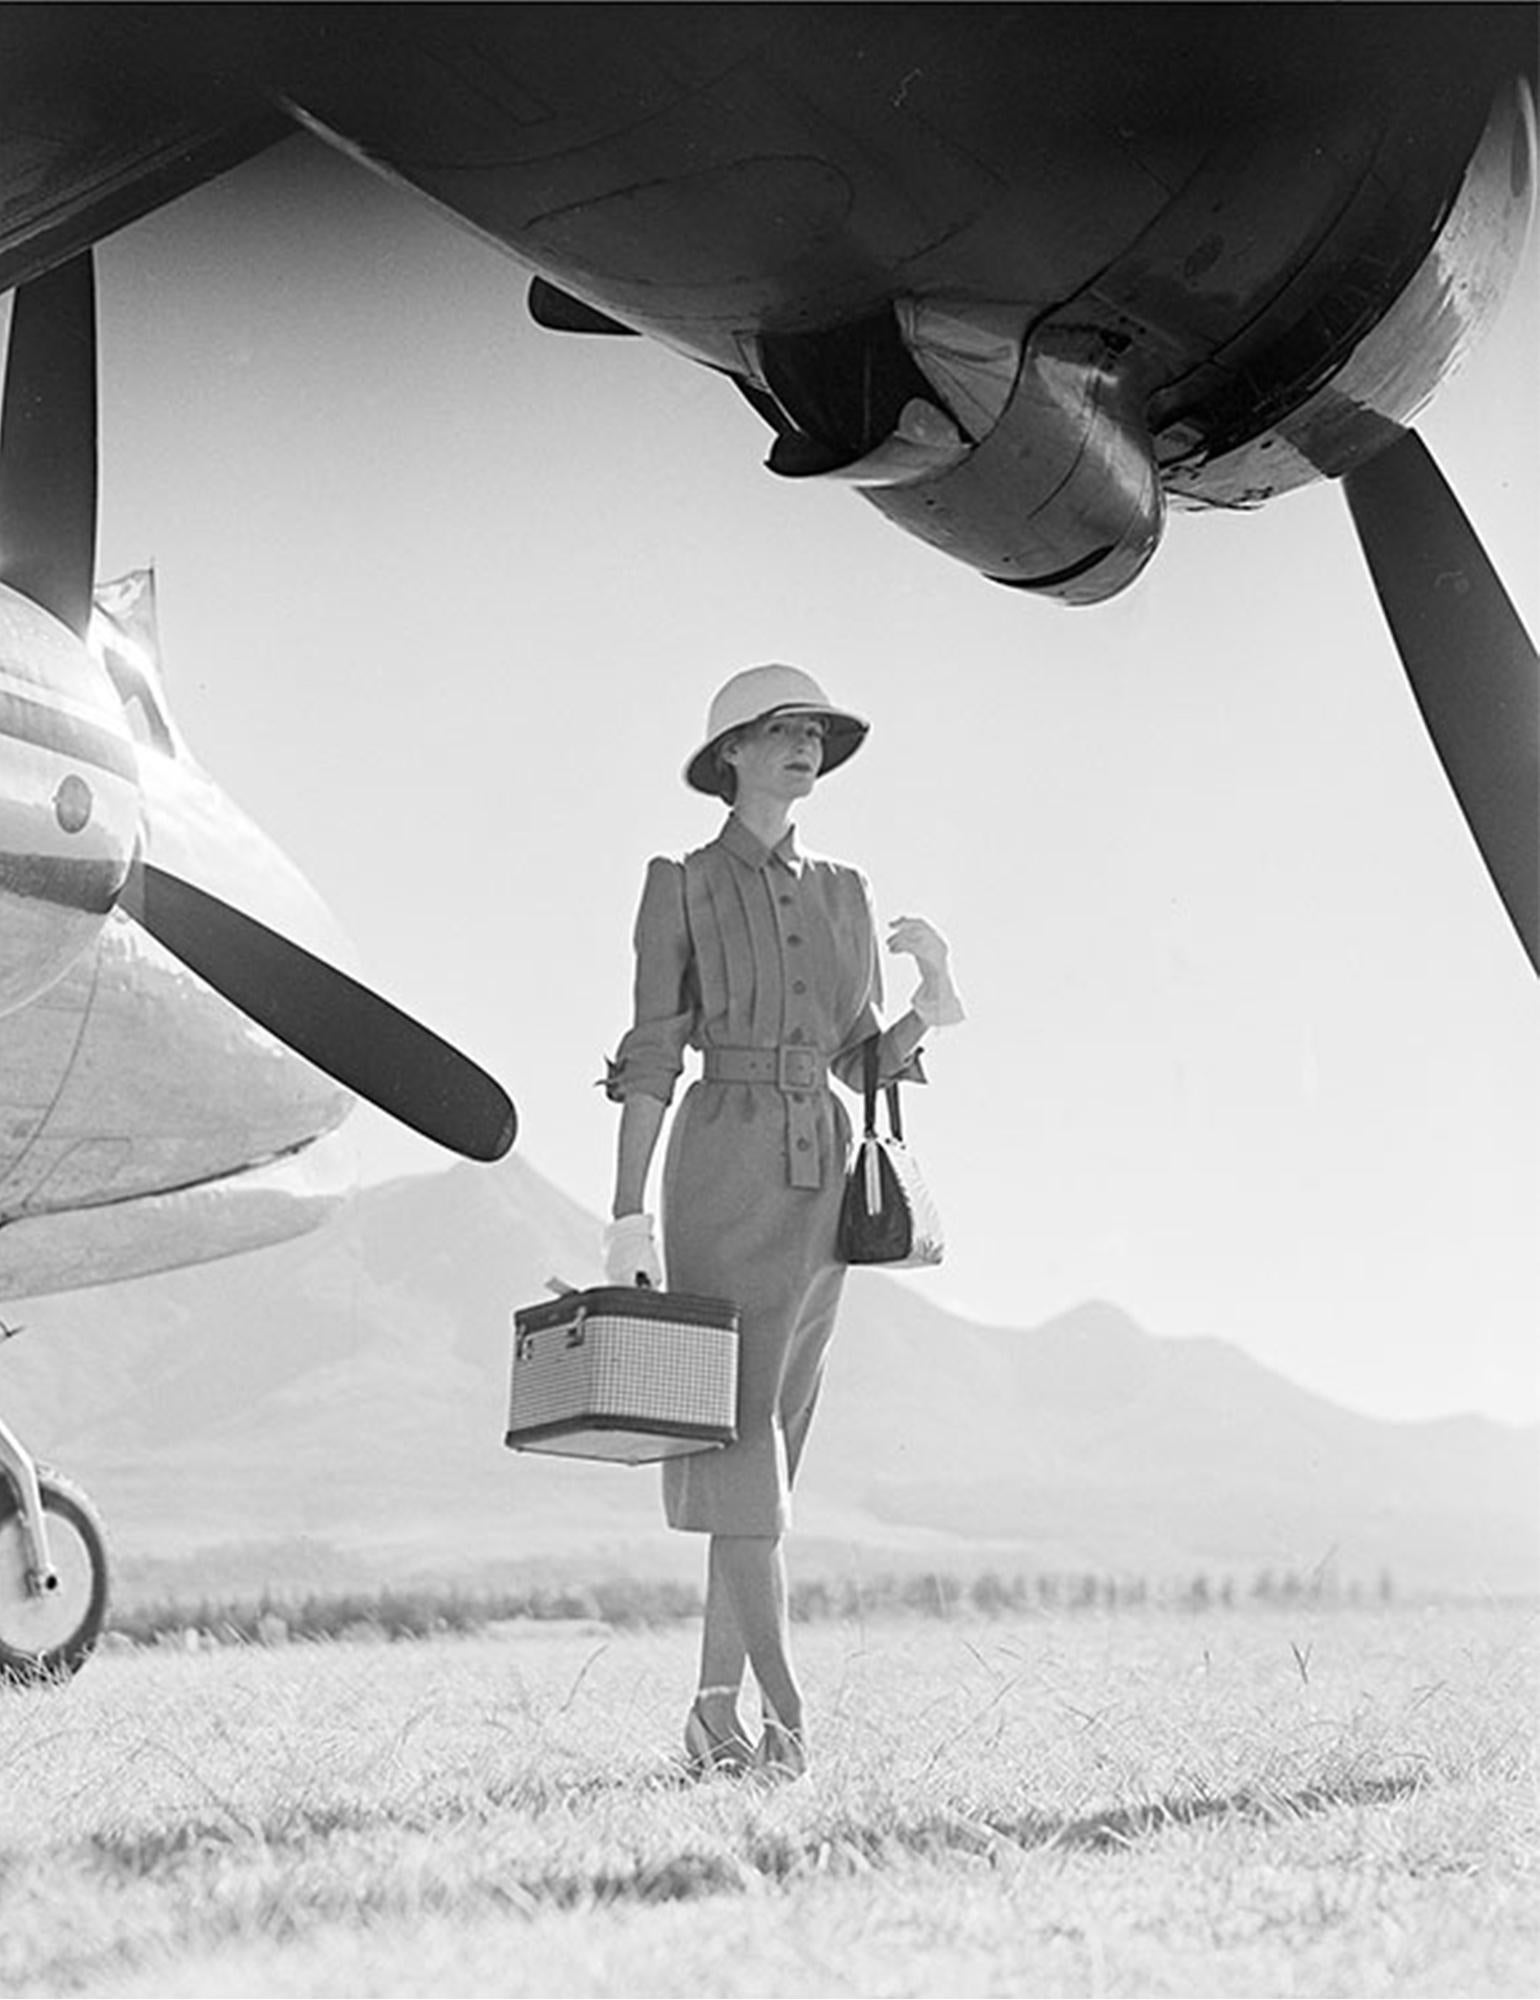 Norman Parkinson Portrait Photograph - In the Blazing Sun at George Airfield